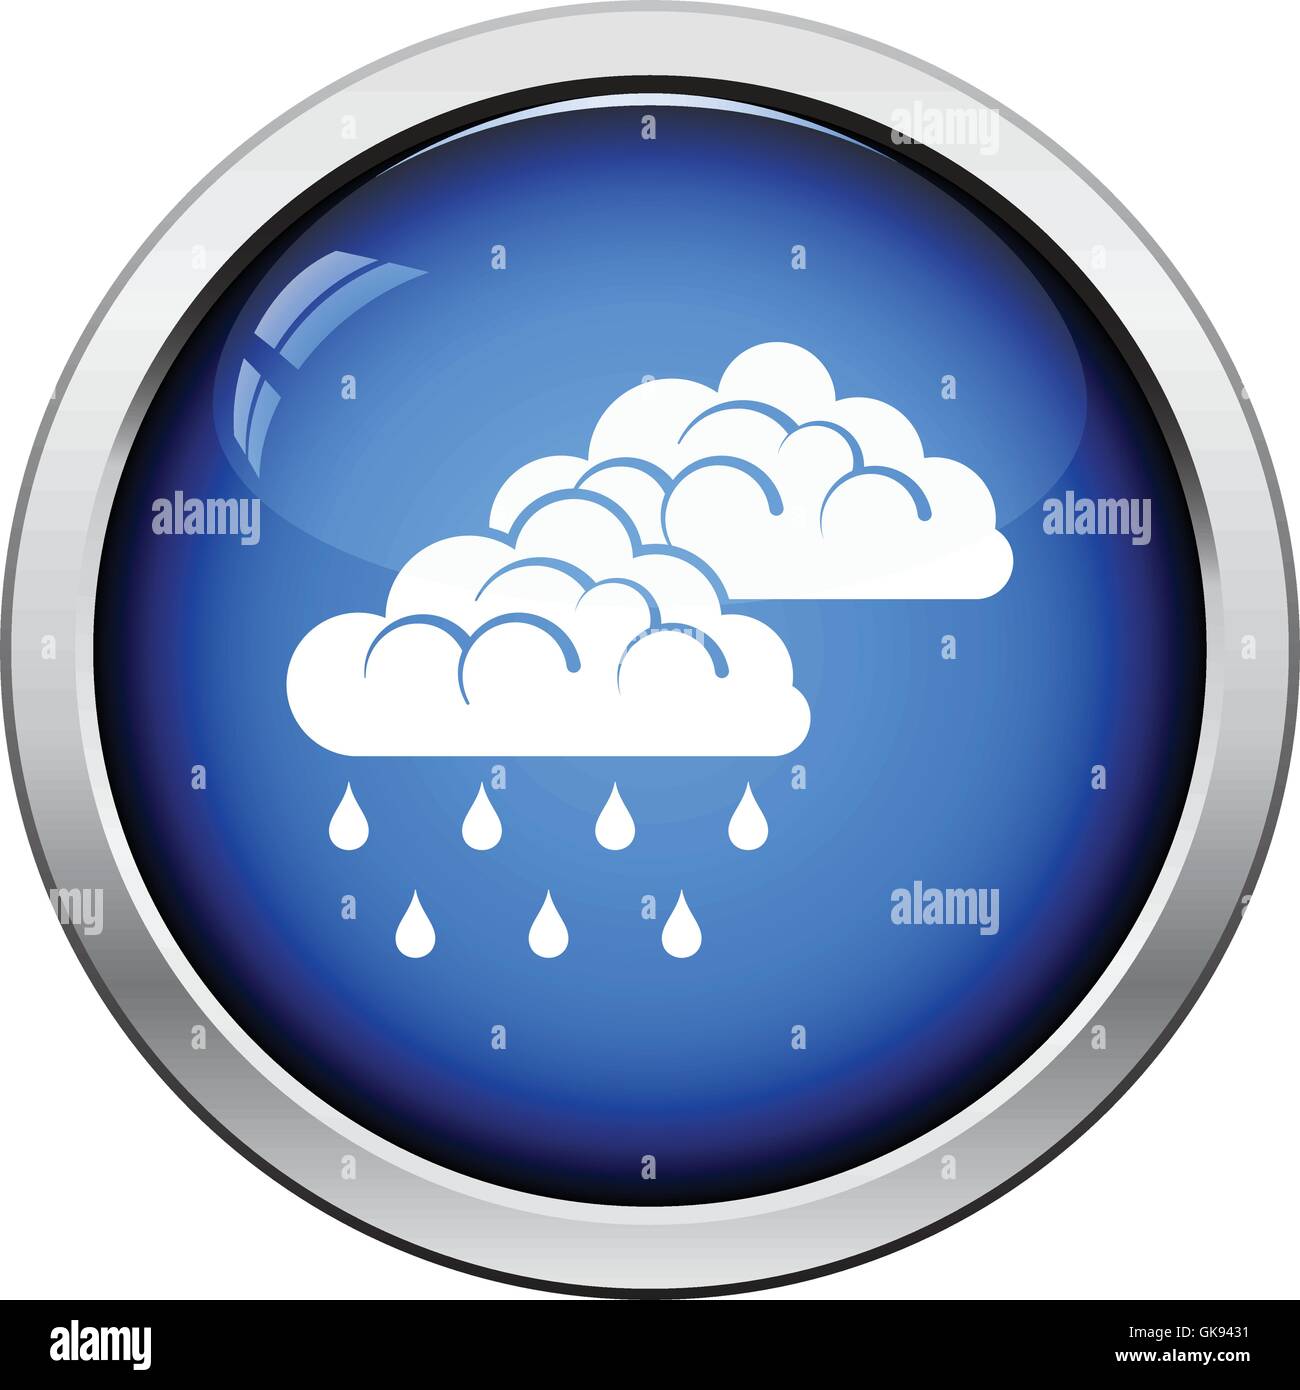 Rian sky Stock Vector Images - Alamy